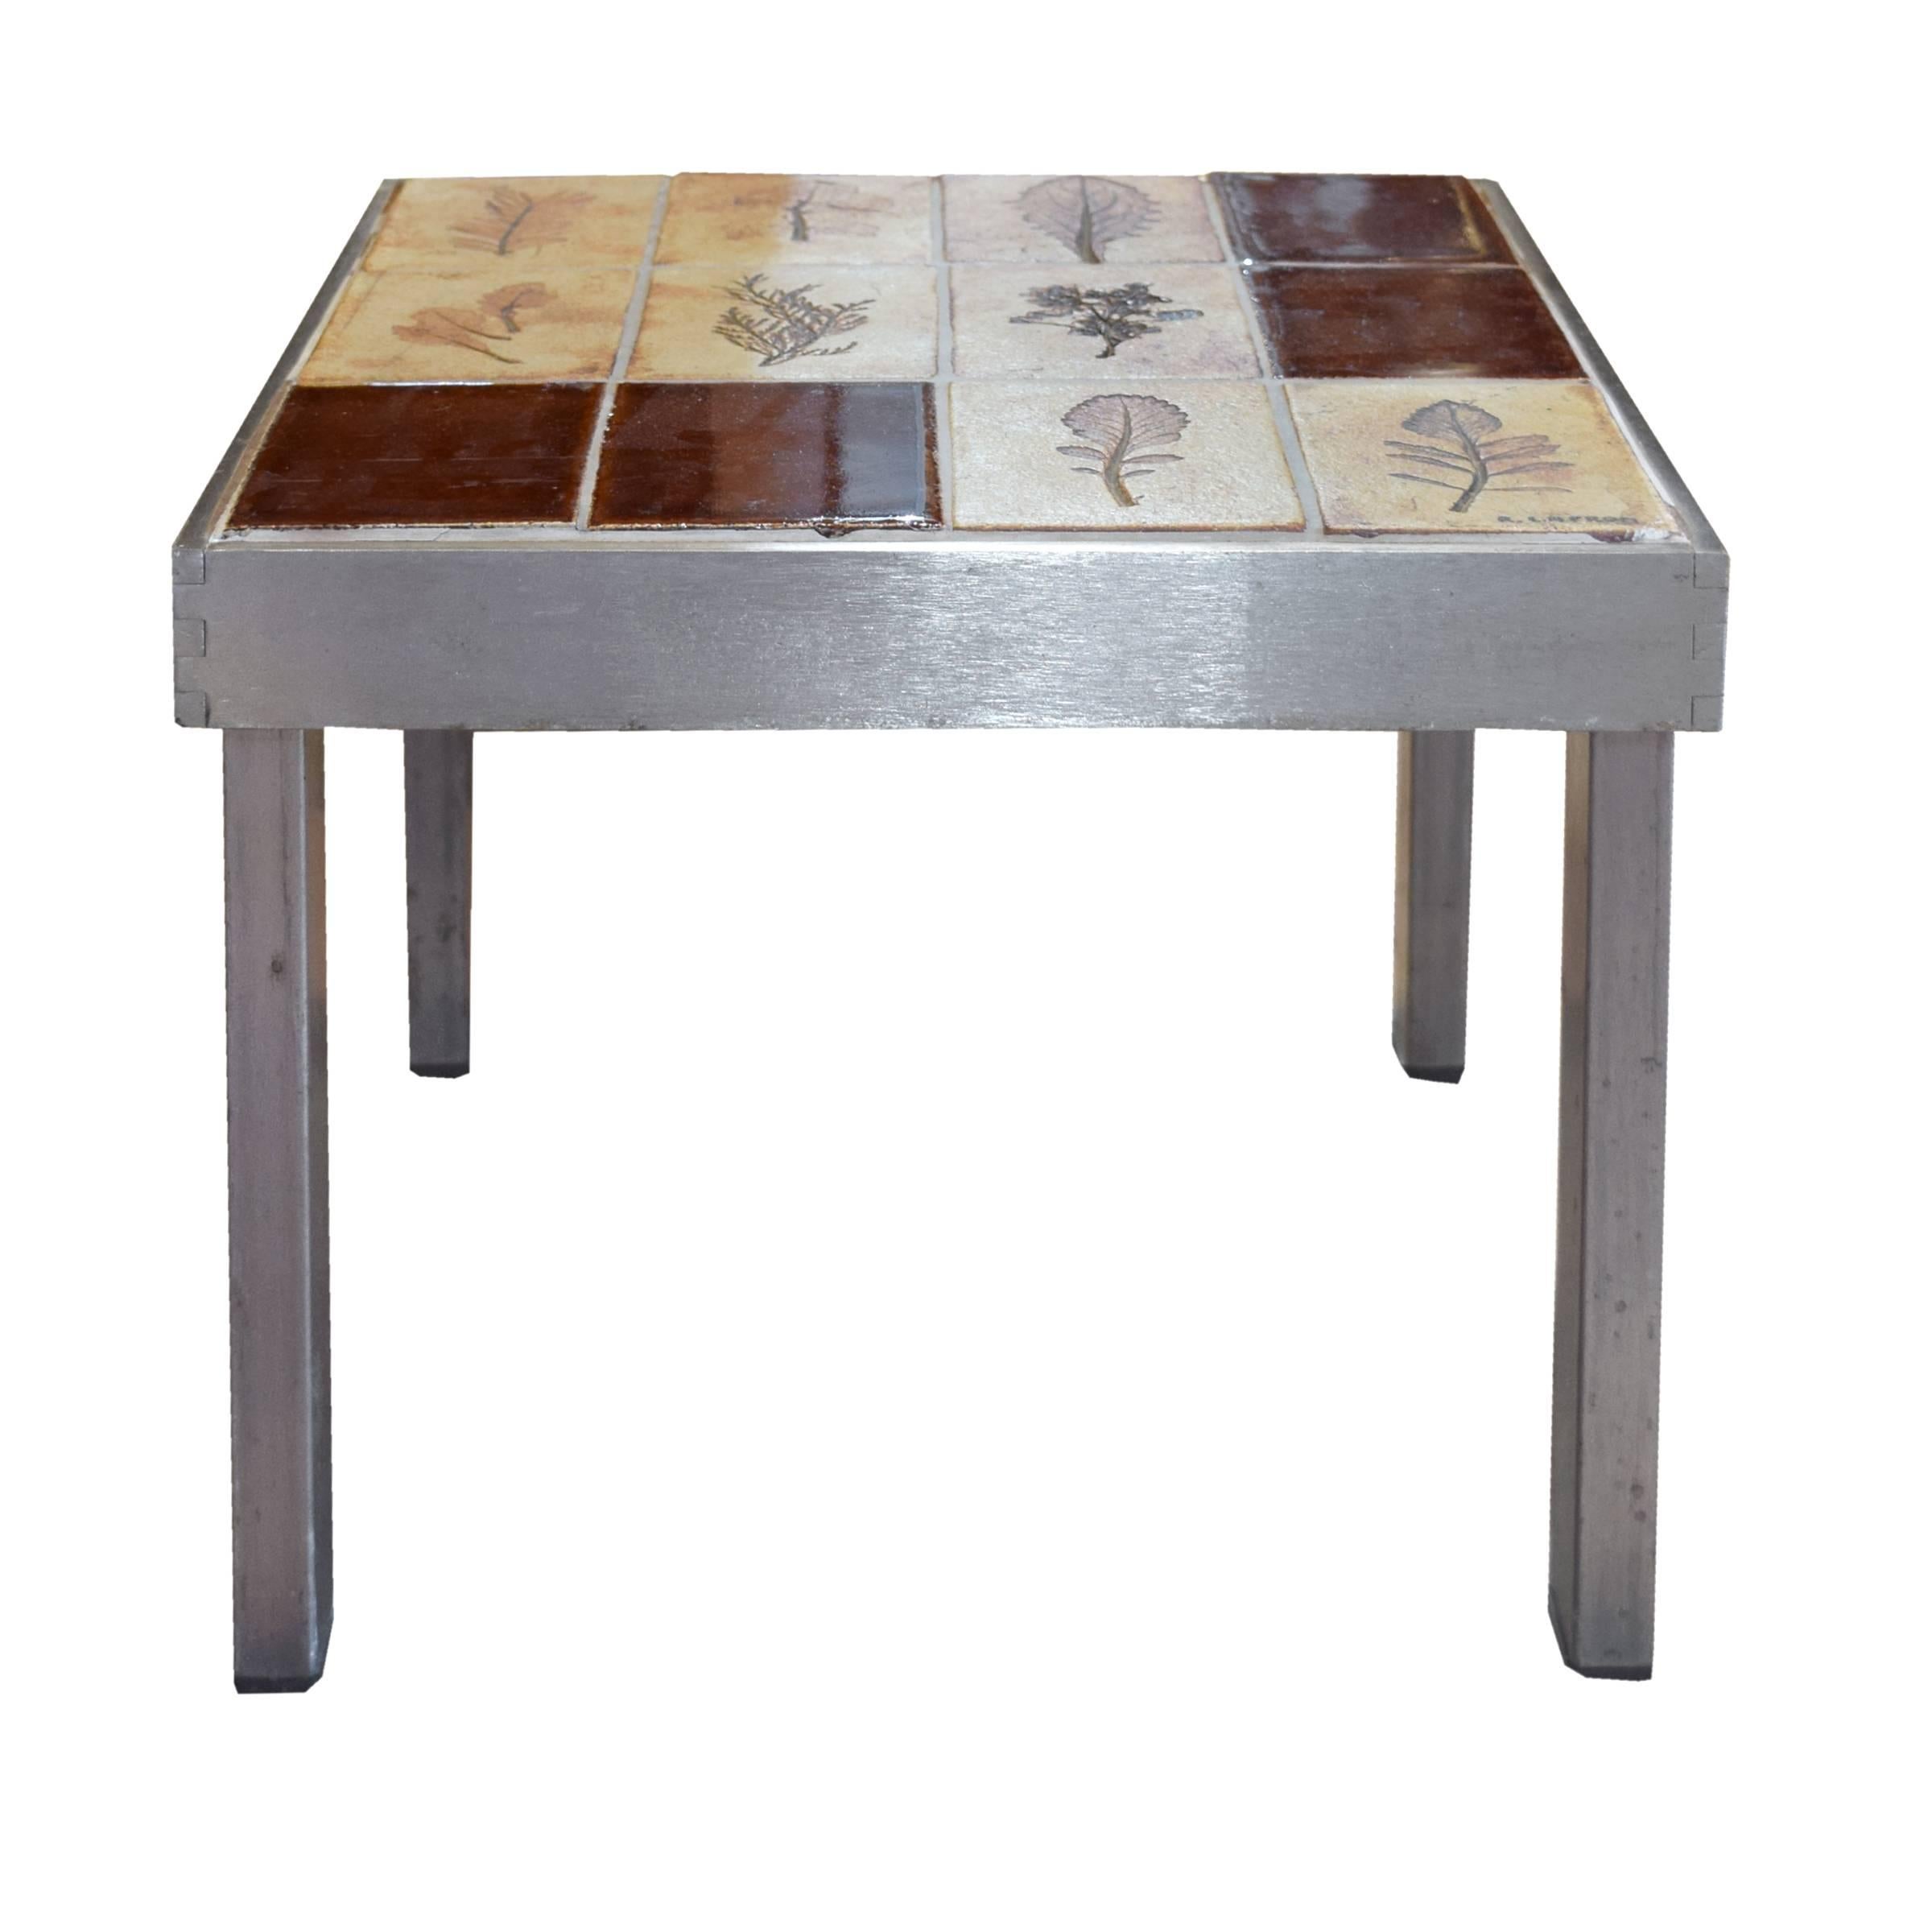 Ceramic Pair of French Midcentury Steel and Tile Tables by Roger Capron